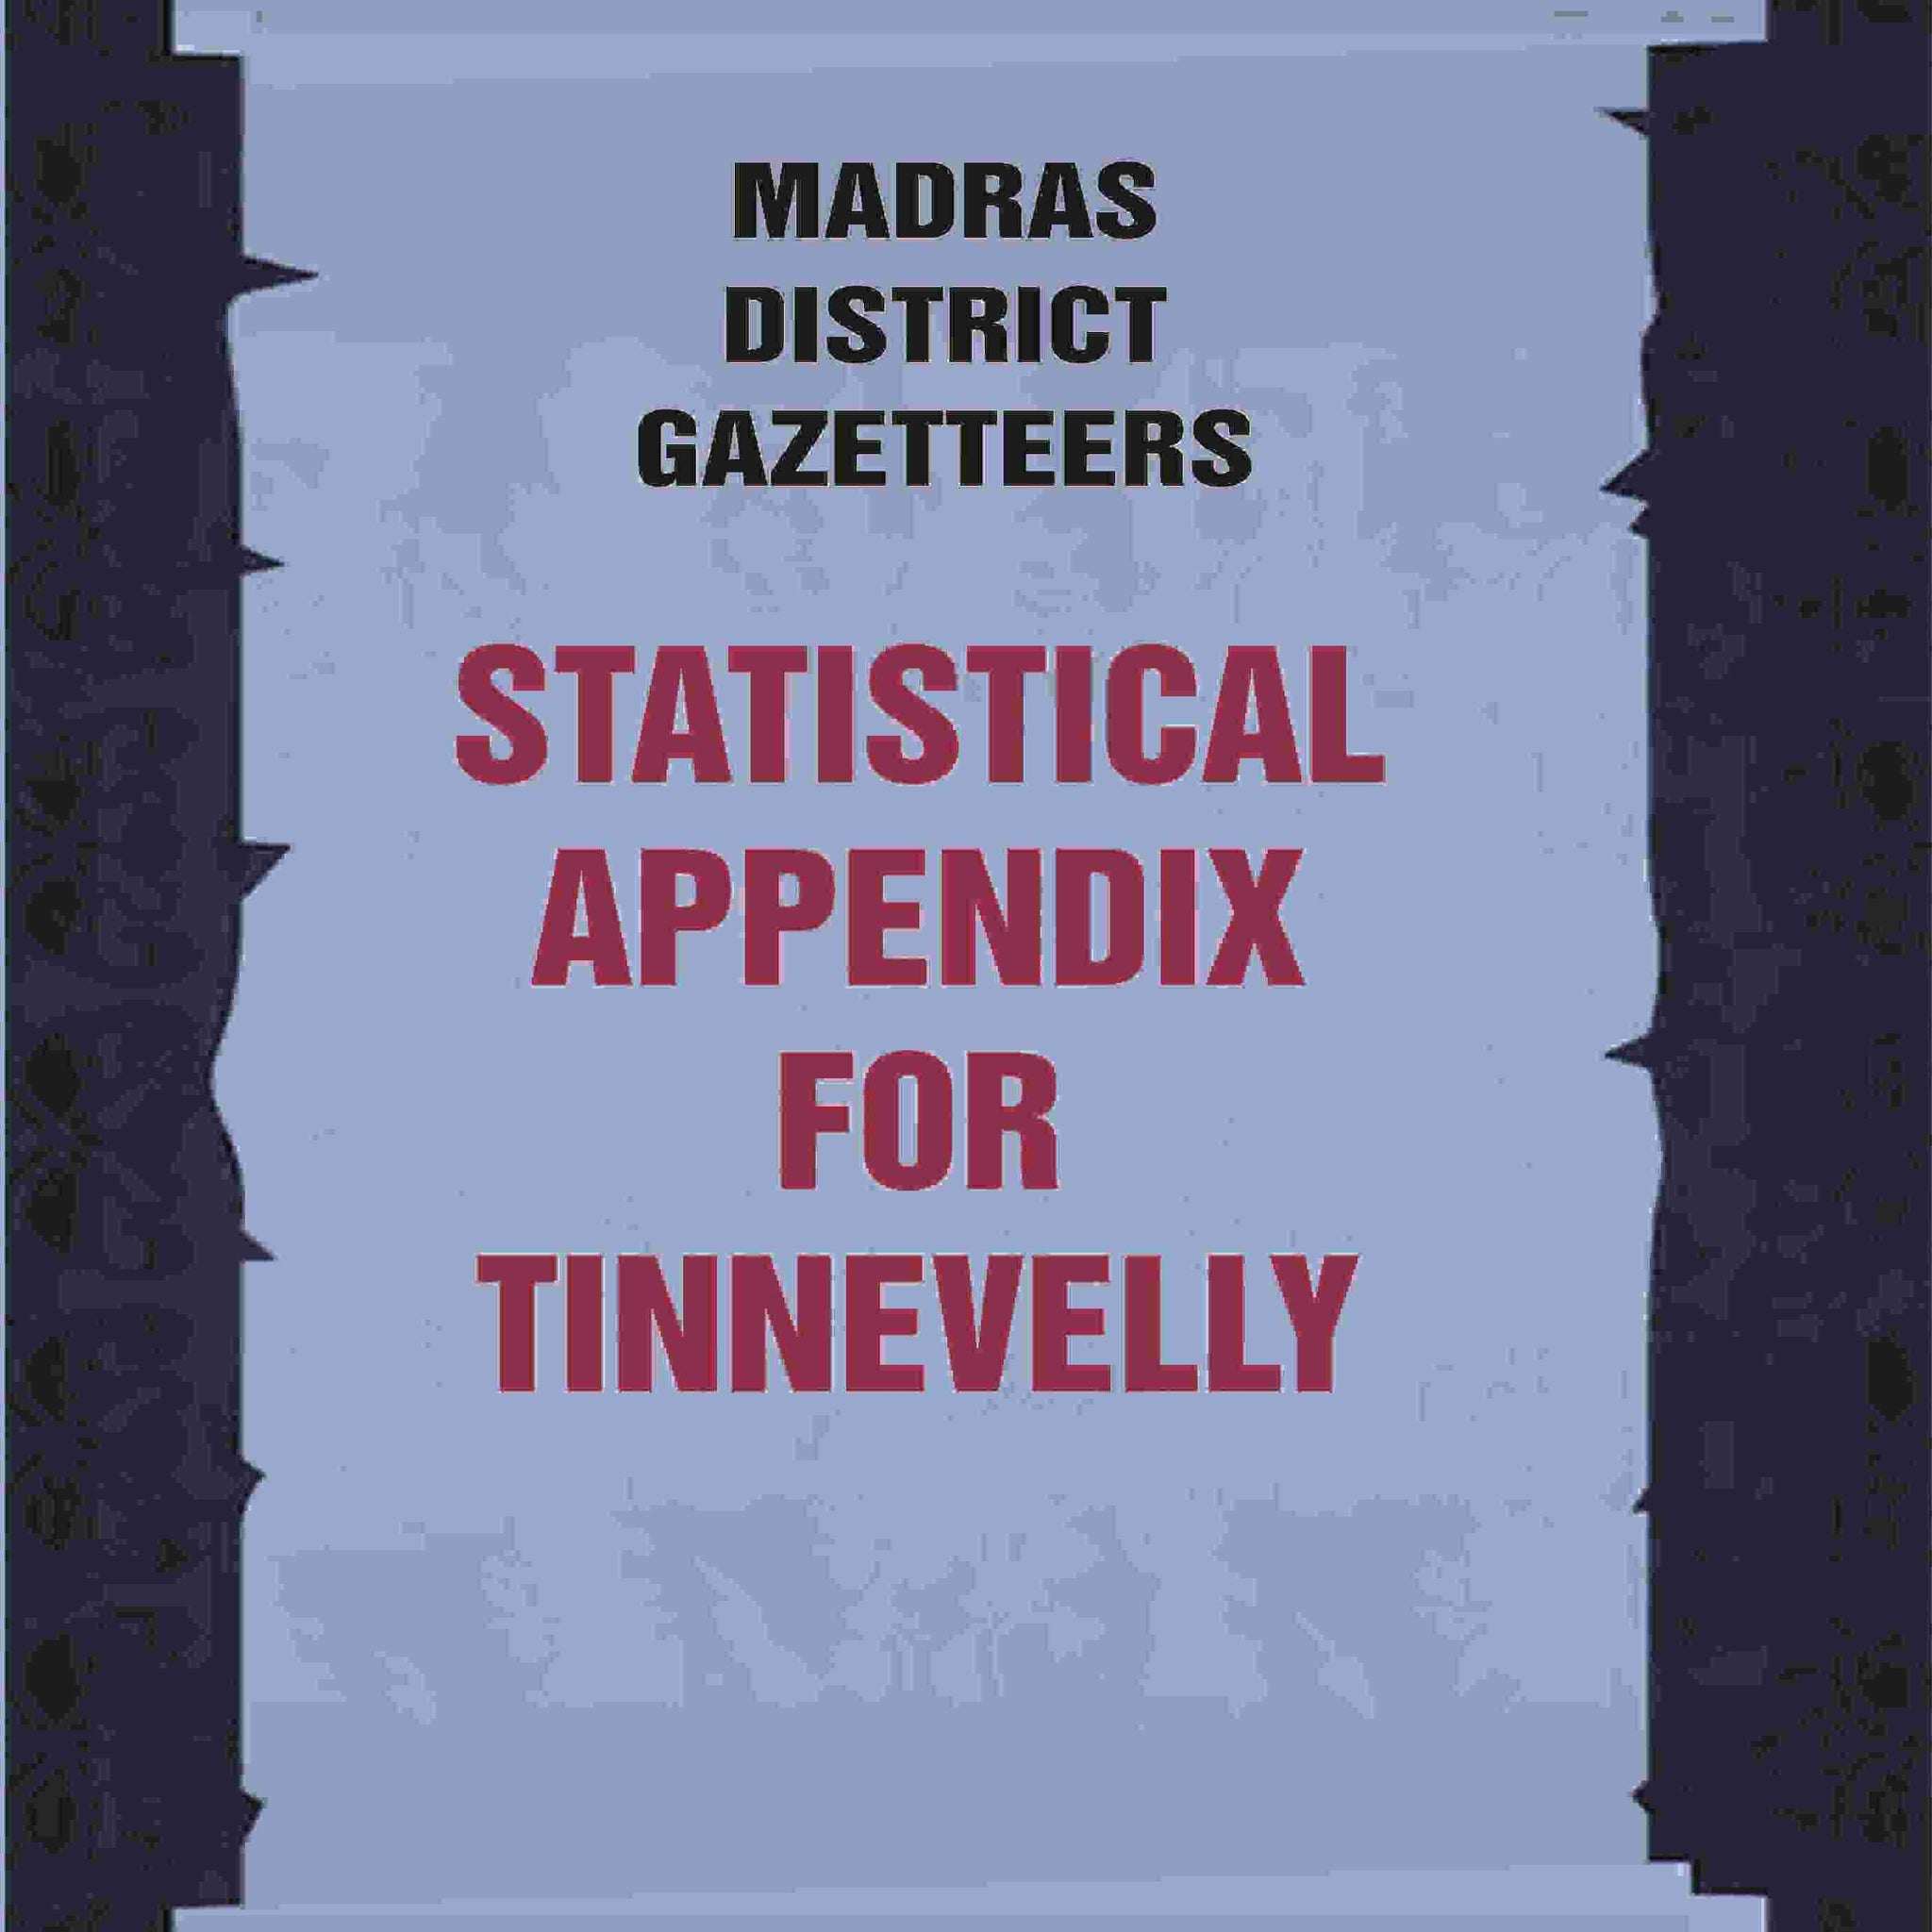 Madras District Gazetteers: Statistical Appendix For Tinnevelly